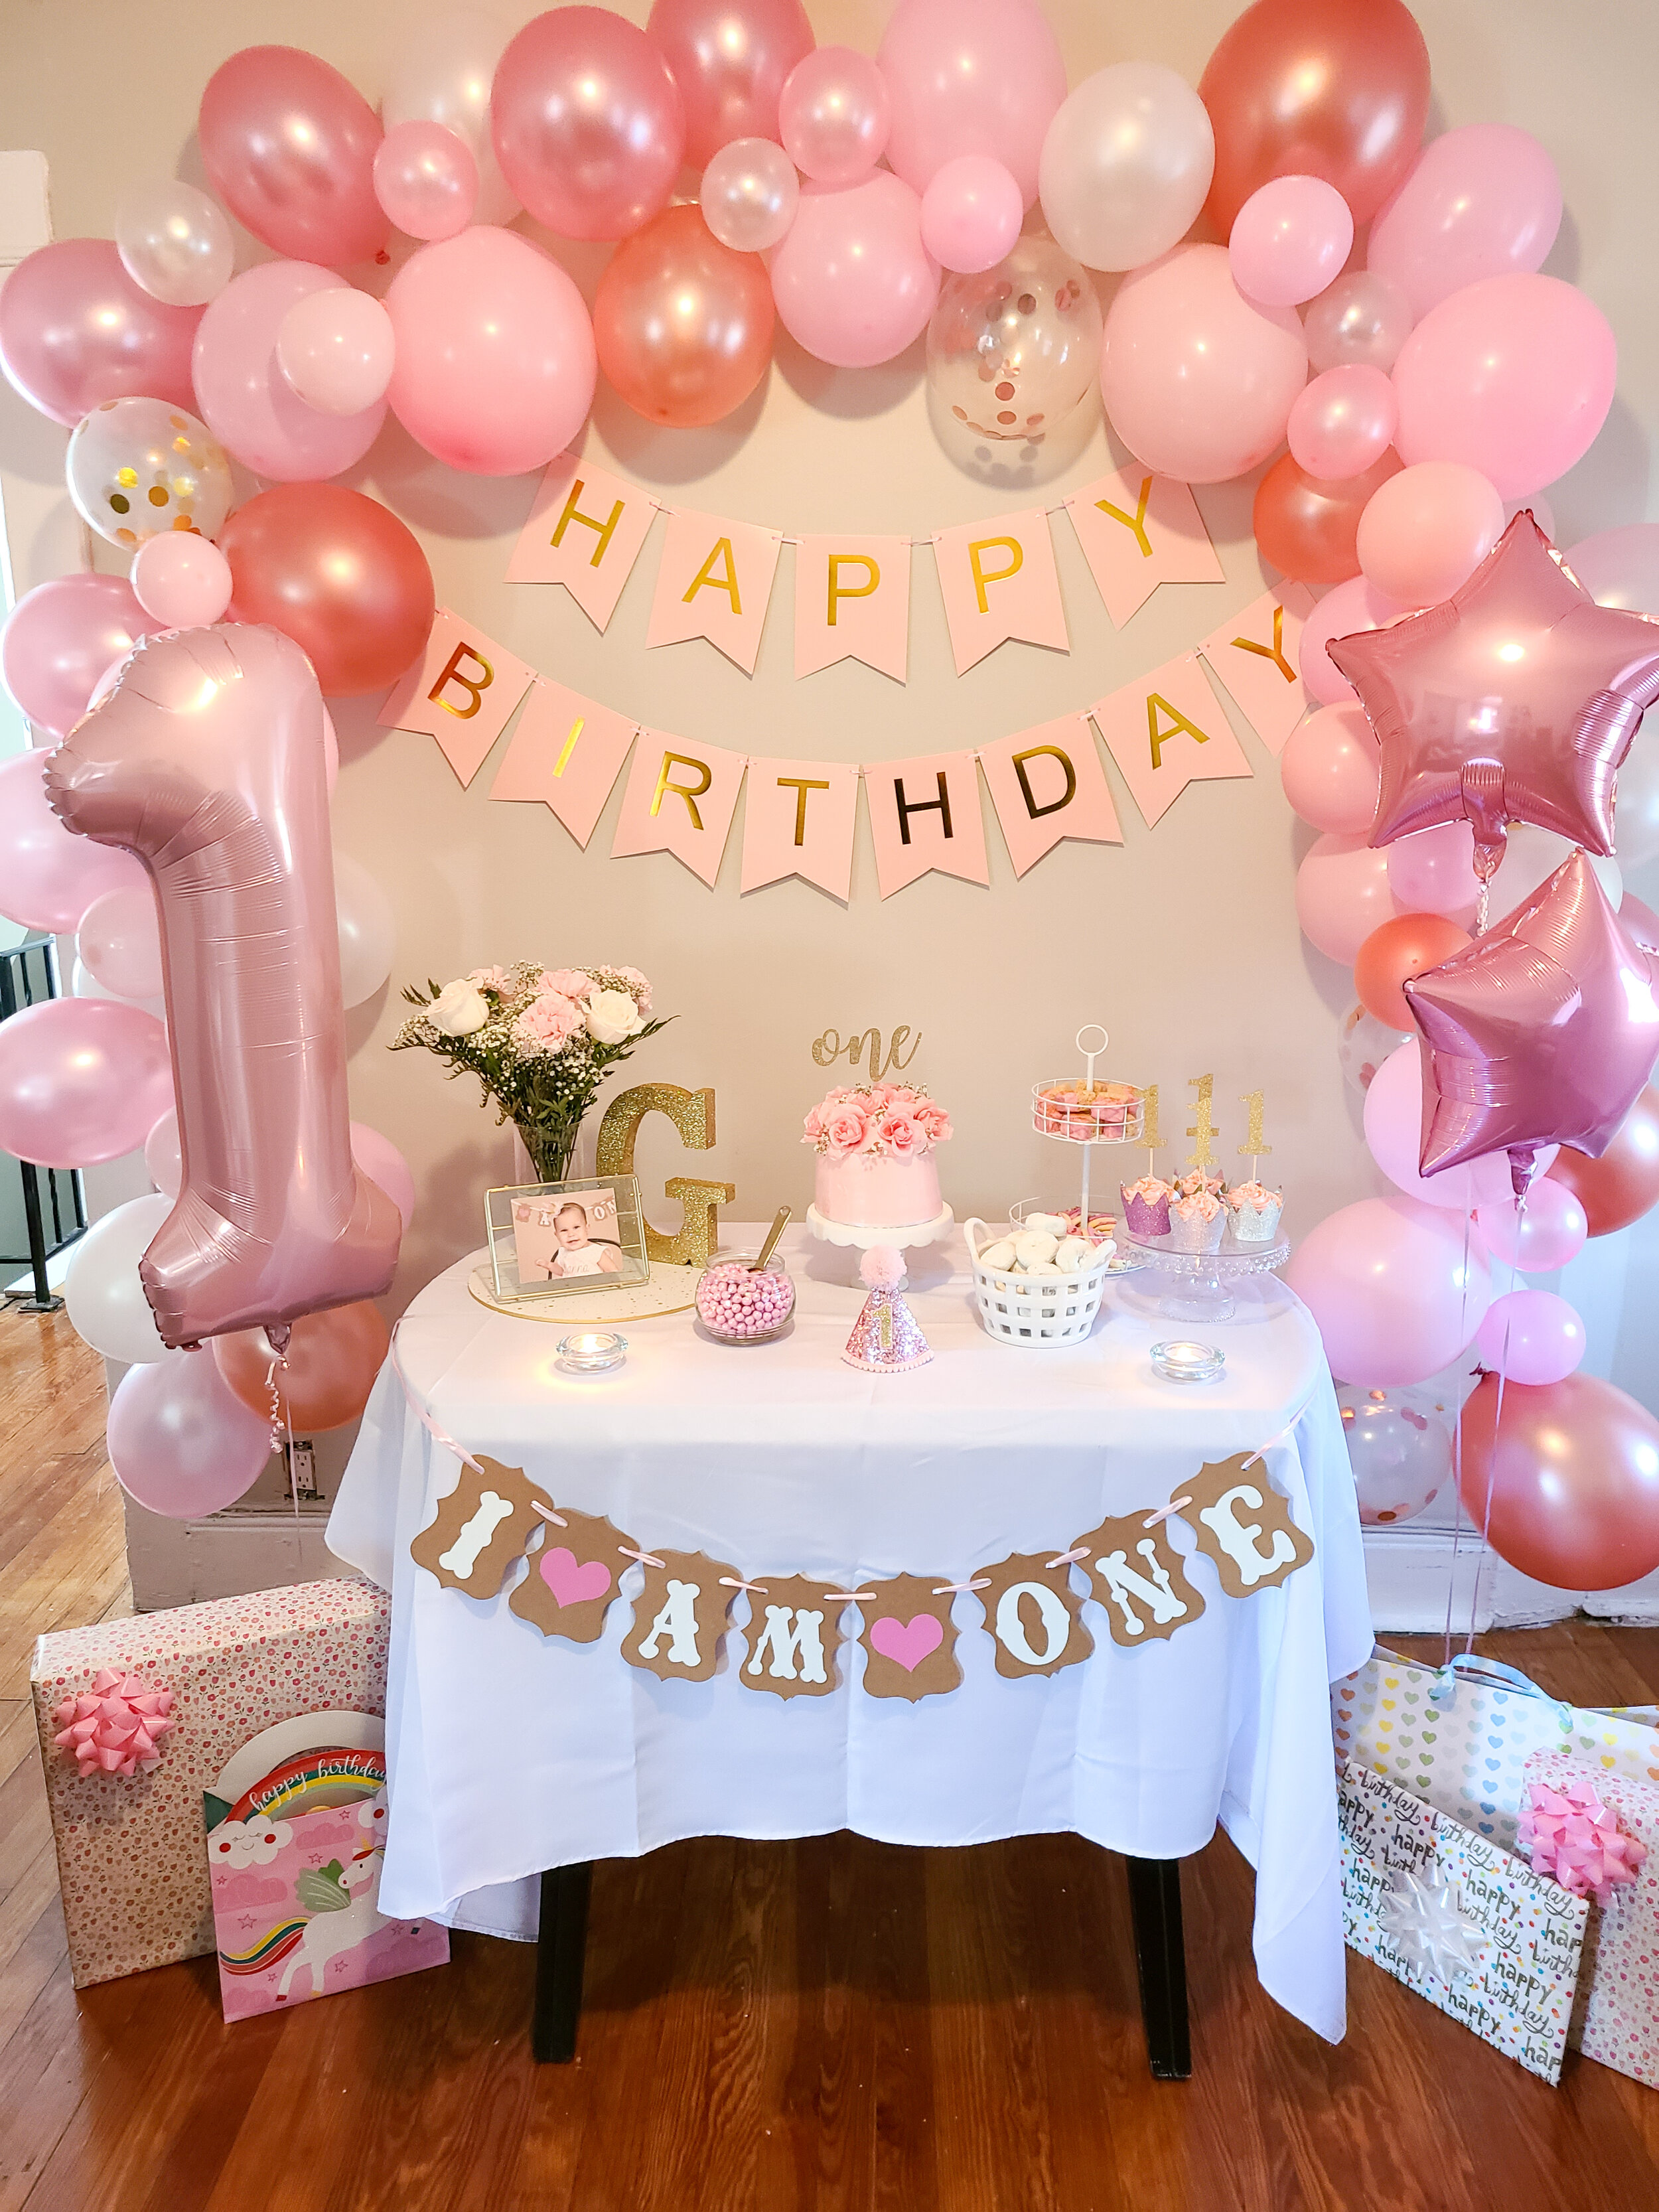 Peppa Pink Pig Birthday Party Decorations with backdrop pig peppa foil  balloons | eBay